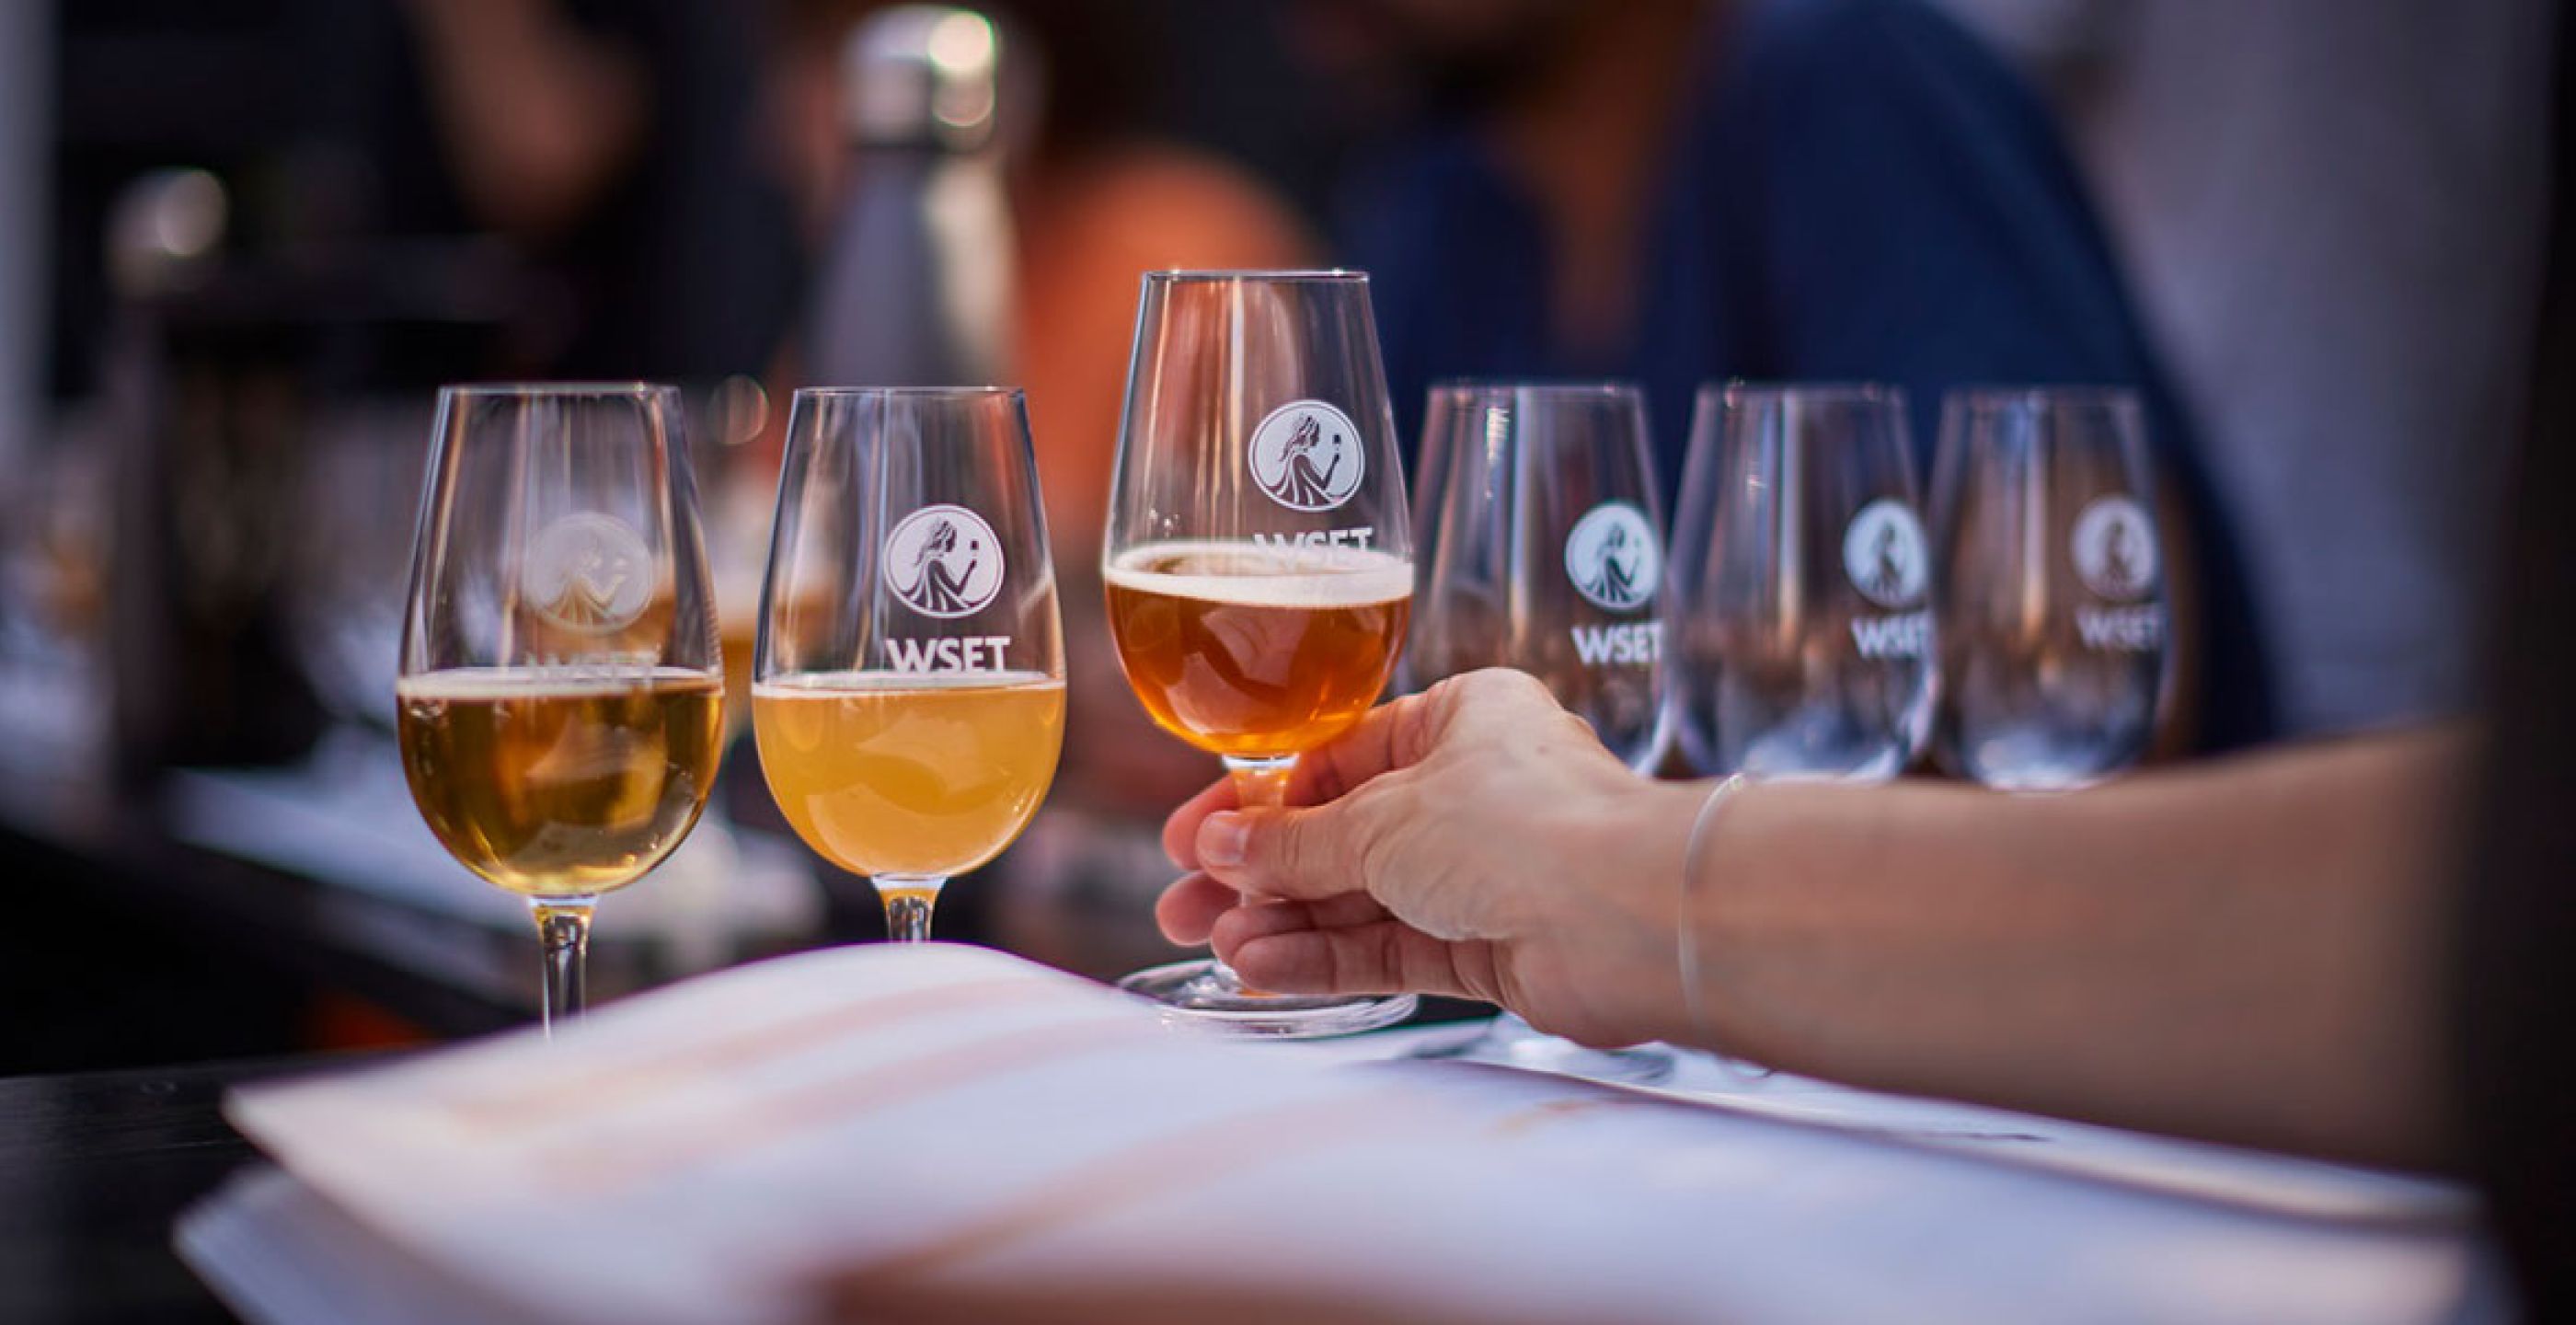 WSET To Launch New Beer Qualifications In Australia